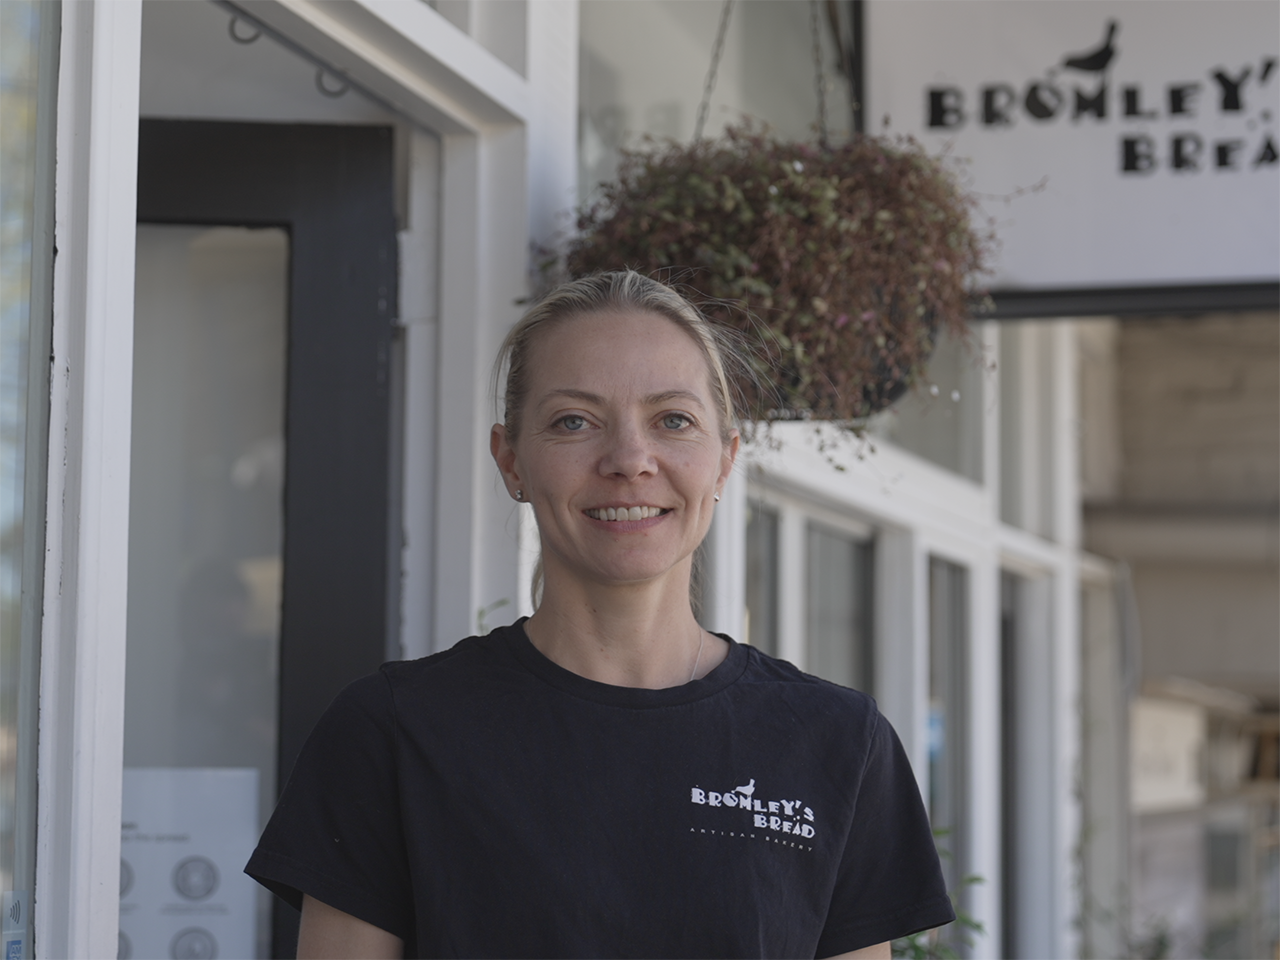 Owner of Bromley\'s Bread, Jenny standing in front of her shop front